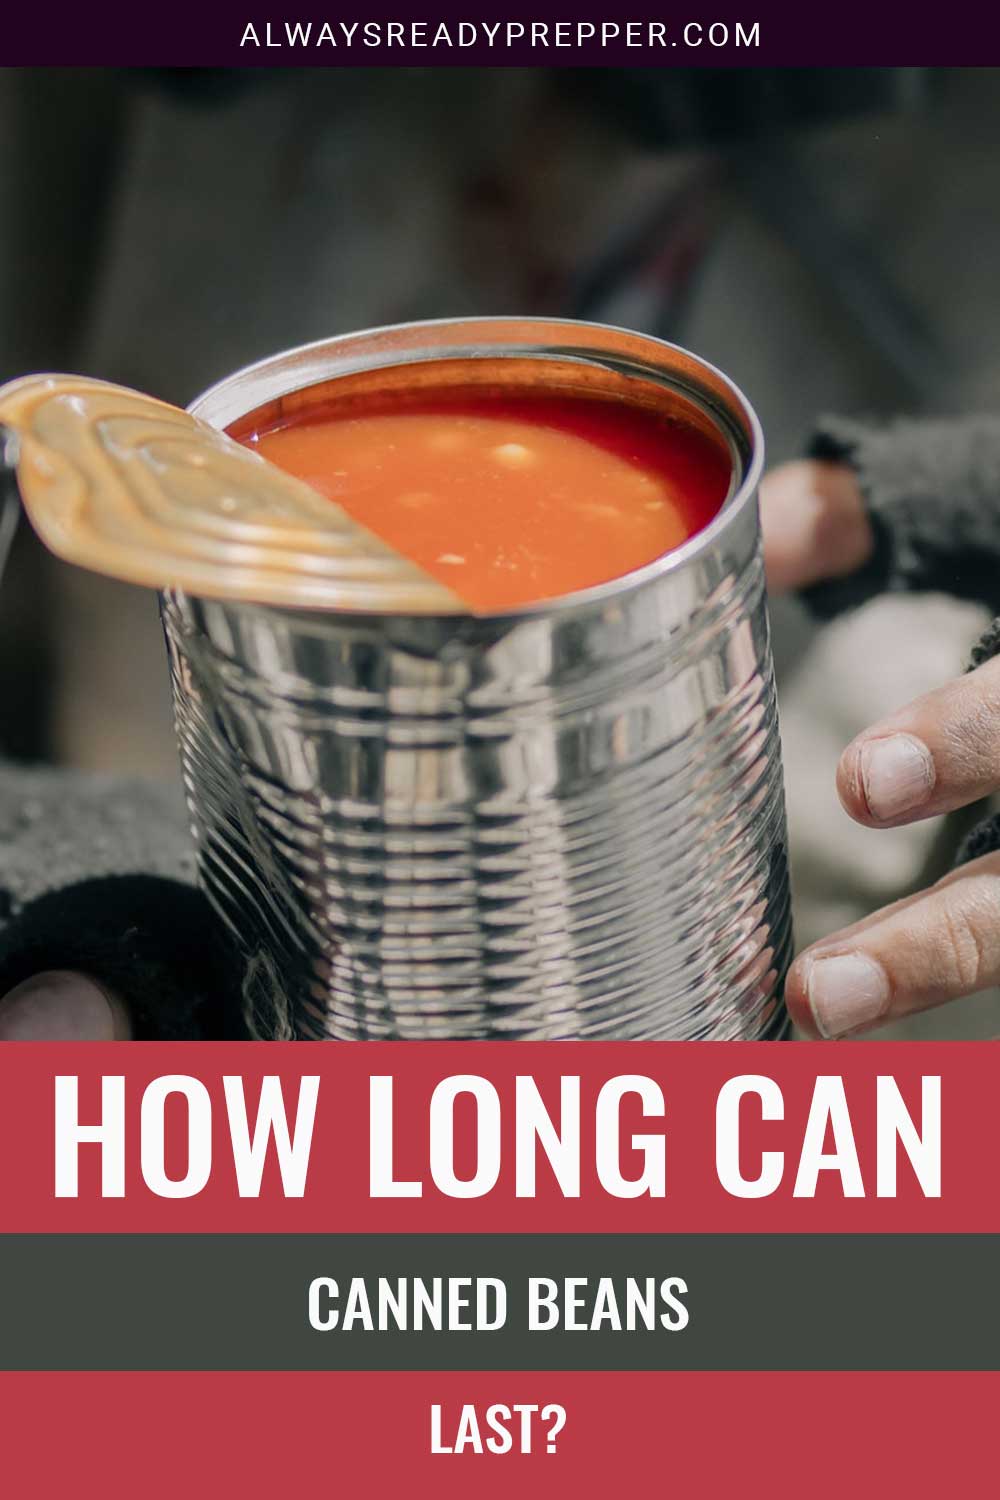 How Long Does Canned Food Last—and How Should You Store It?